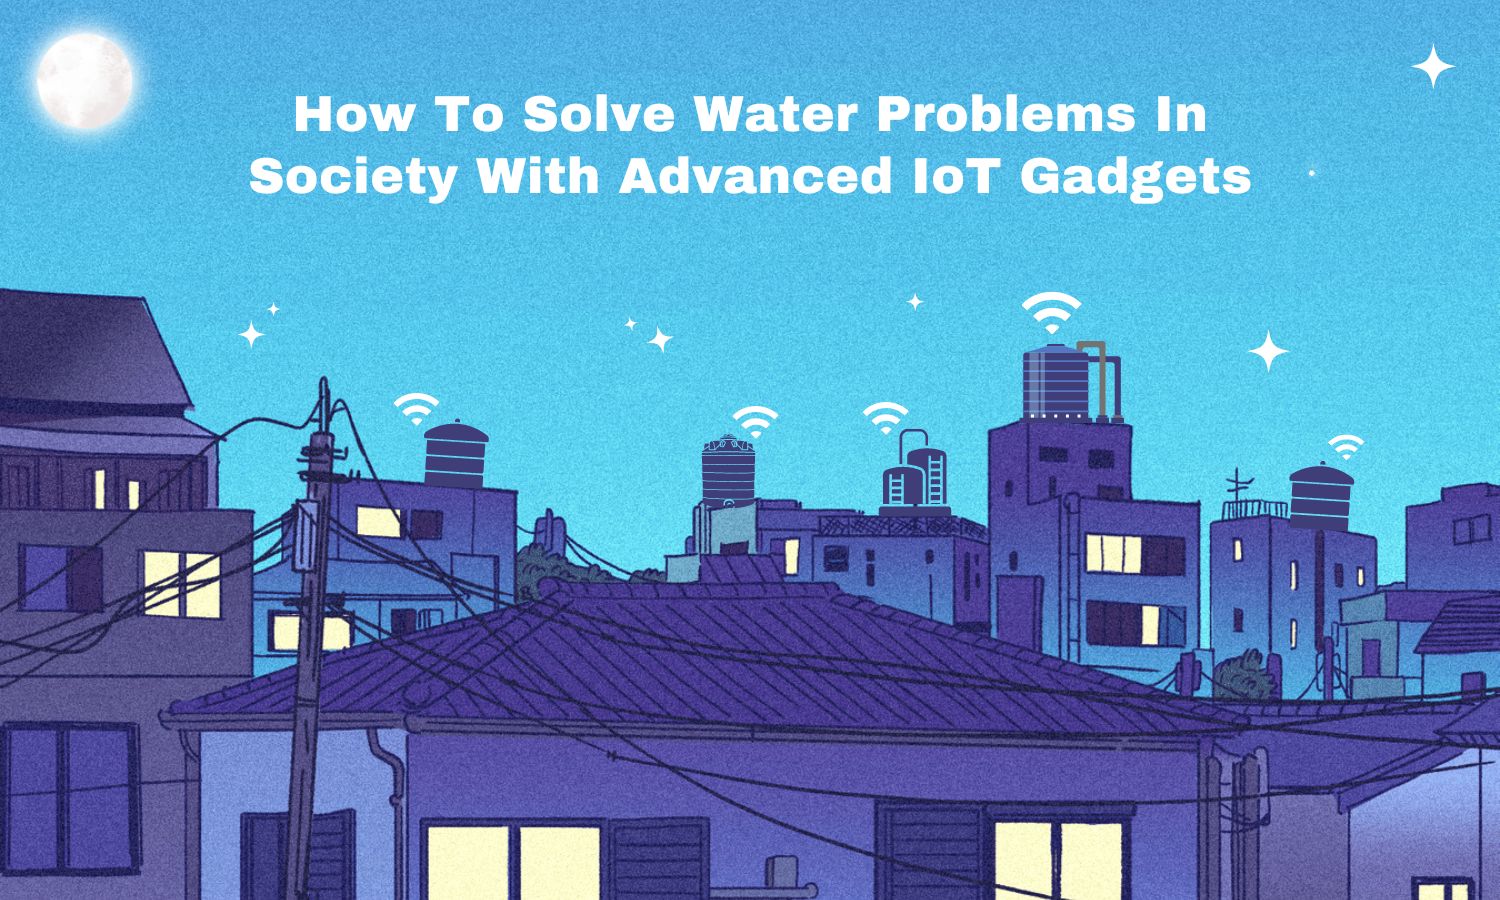 How To Solve Water Problems In Society With Advanced IoT Gadgets